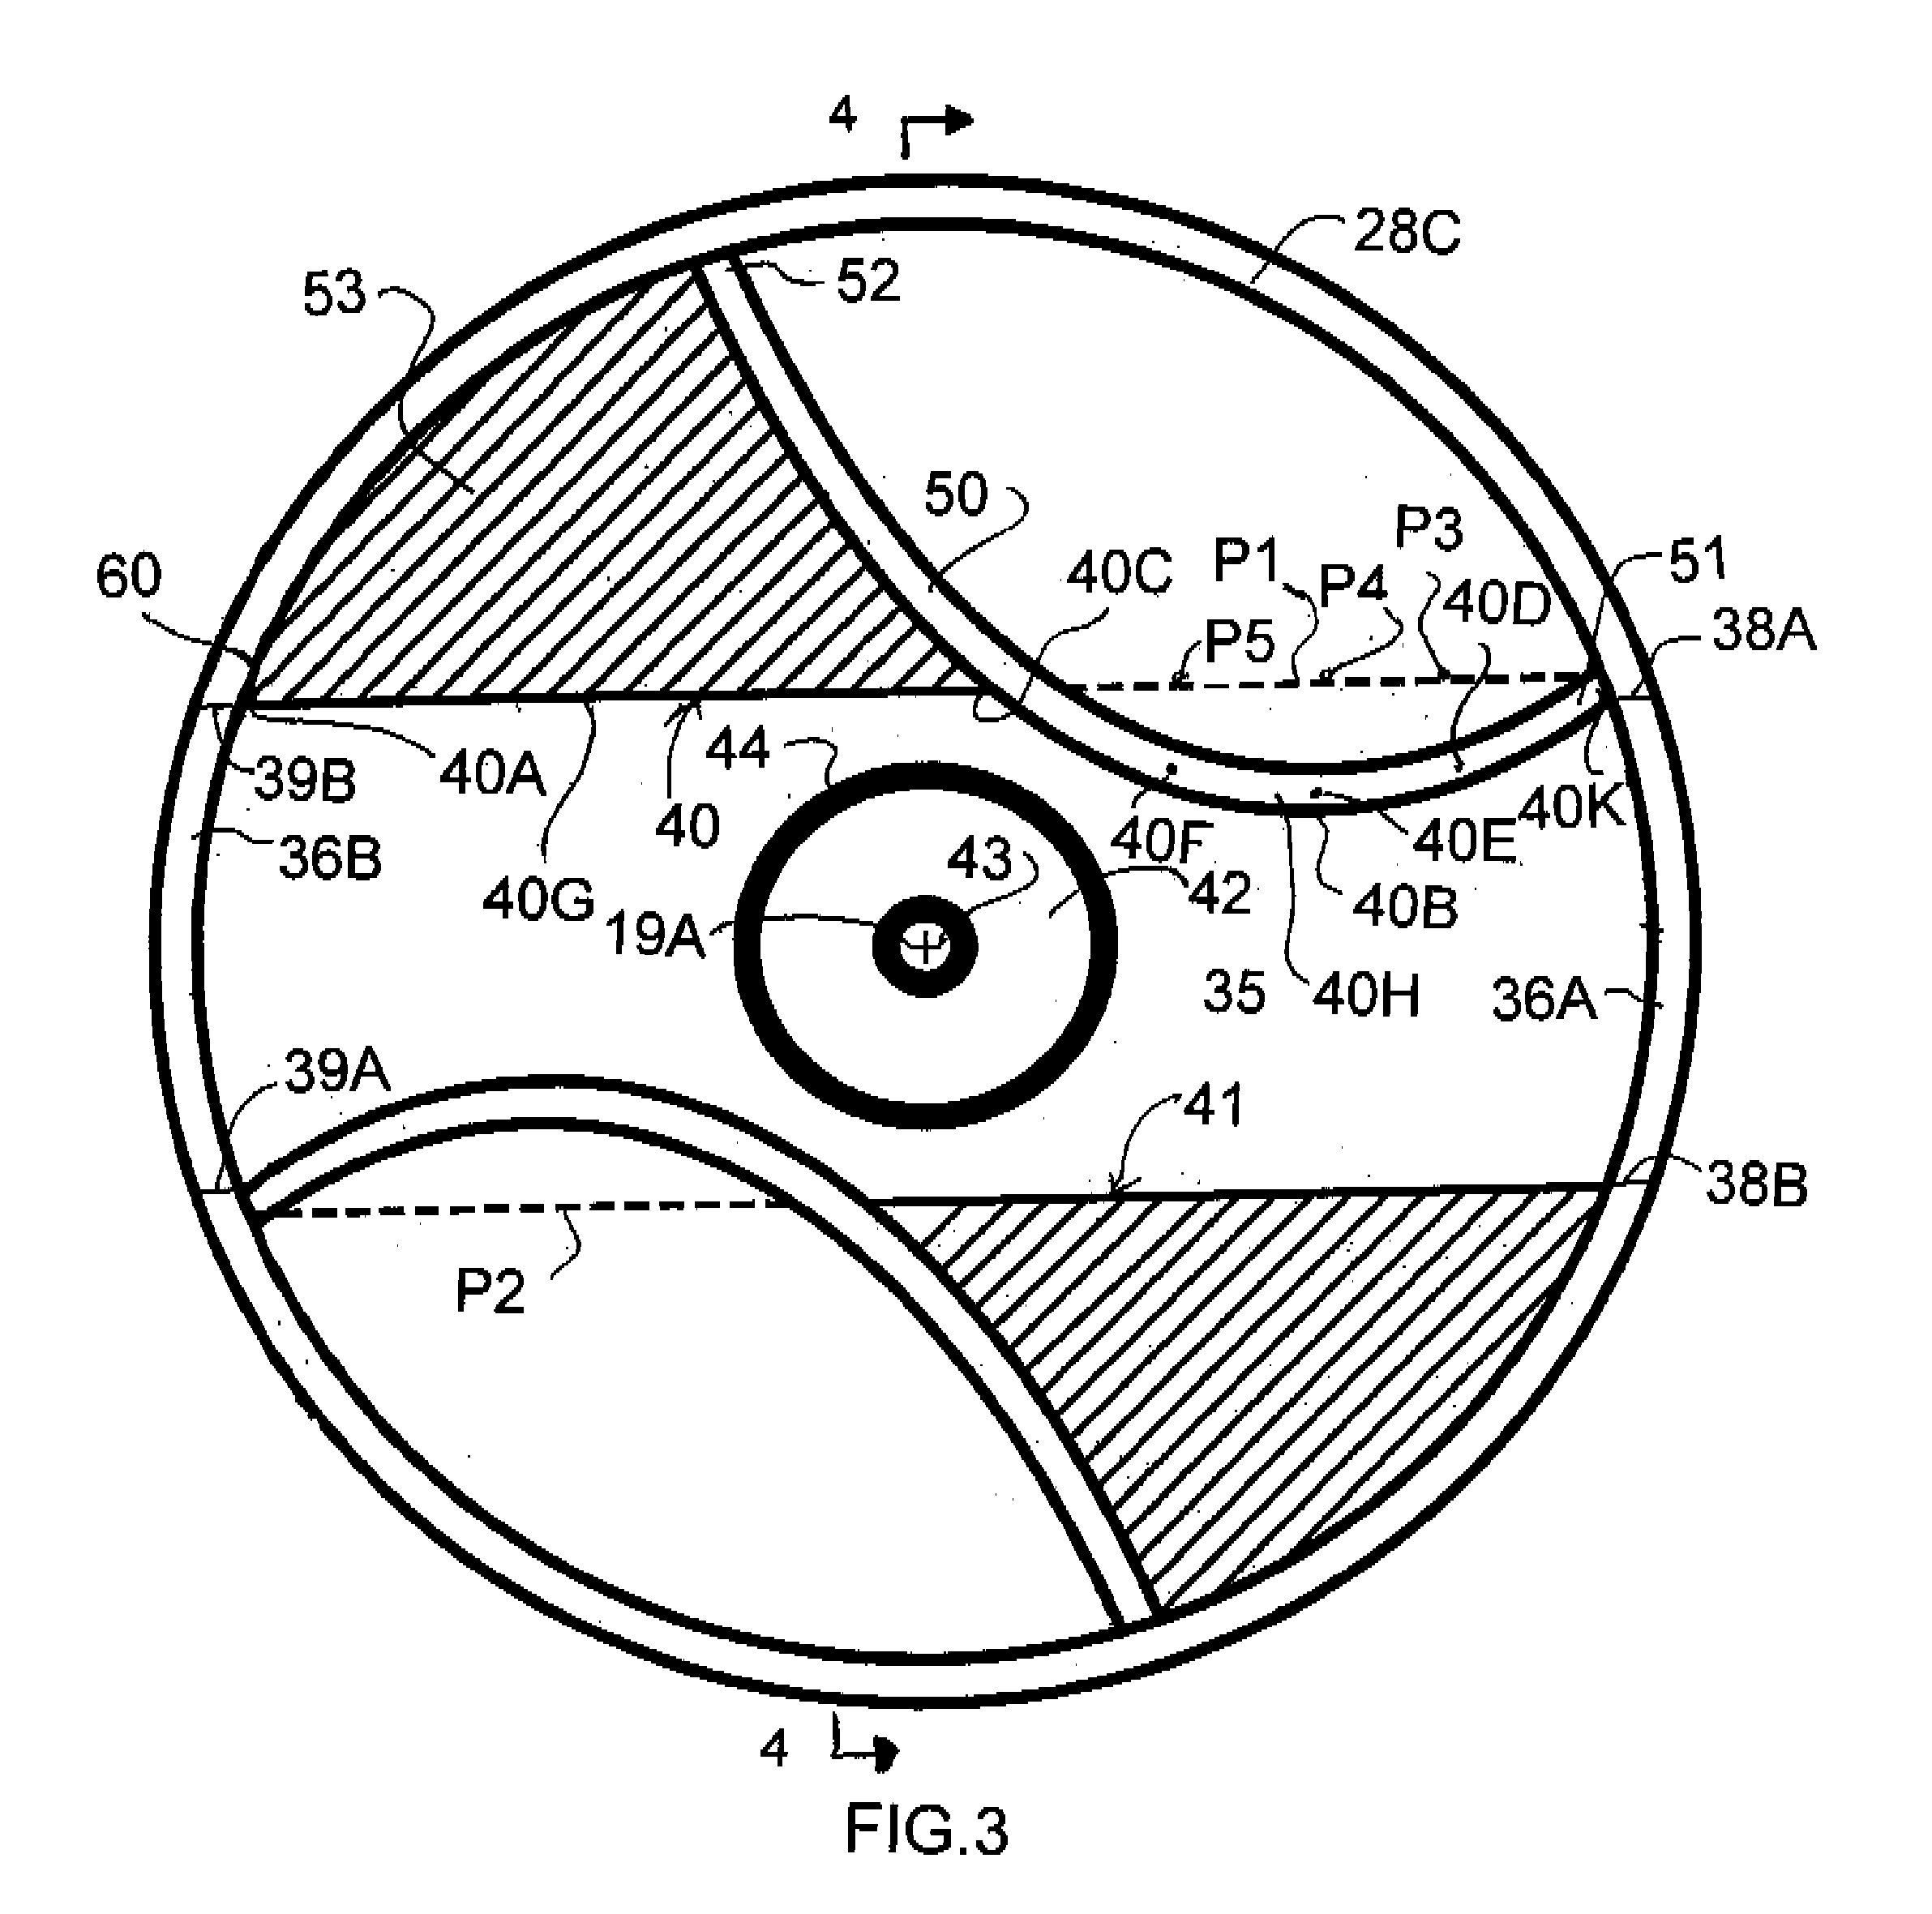 Centrifuge with shaping of feed chamber to reduce wear